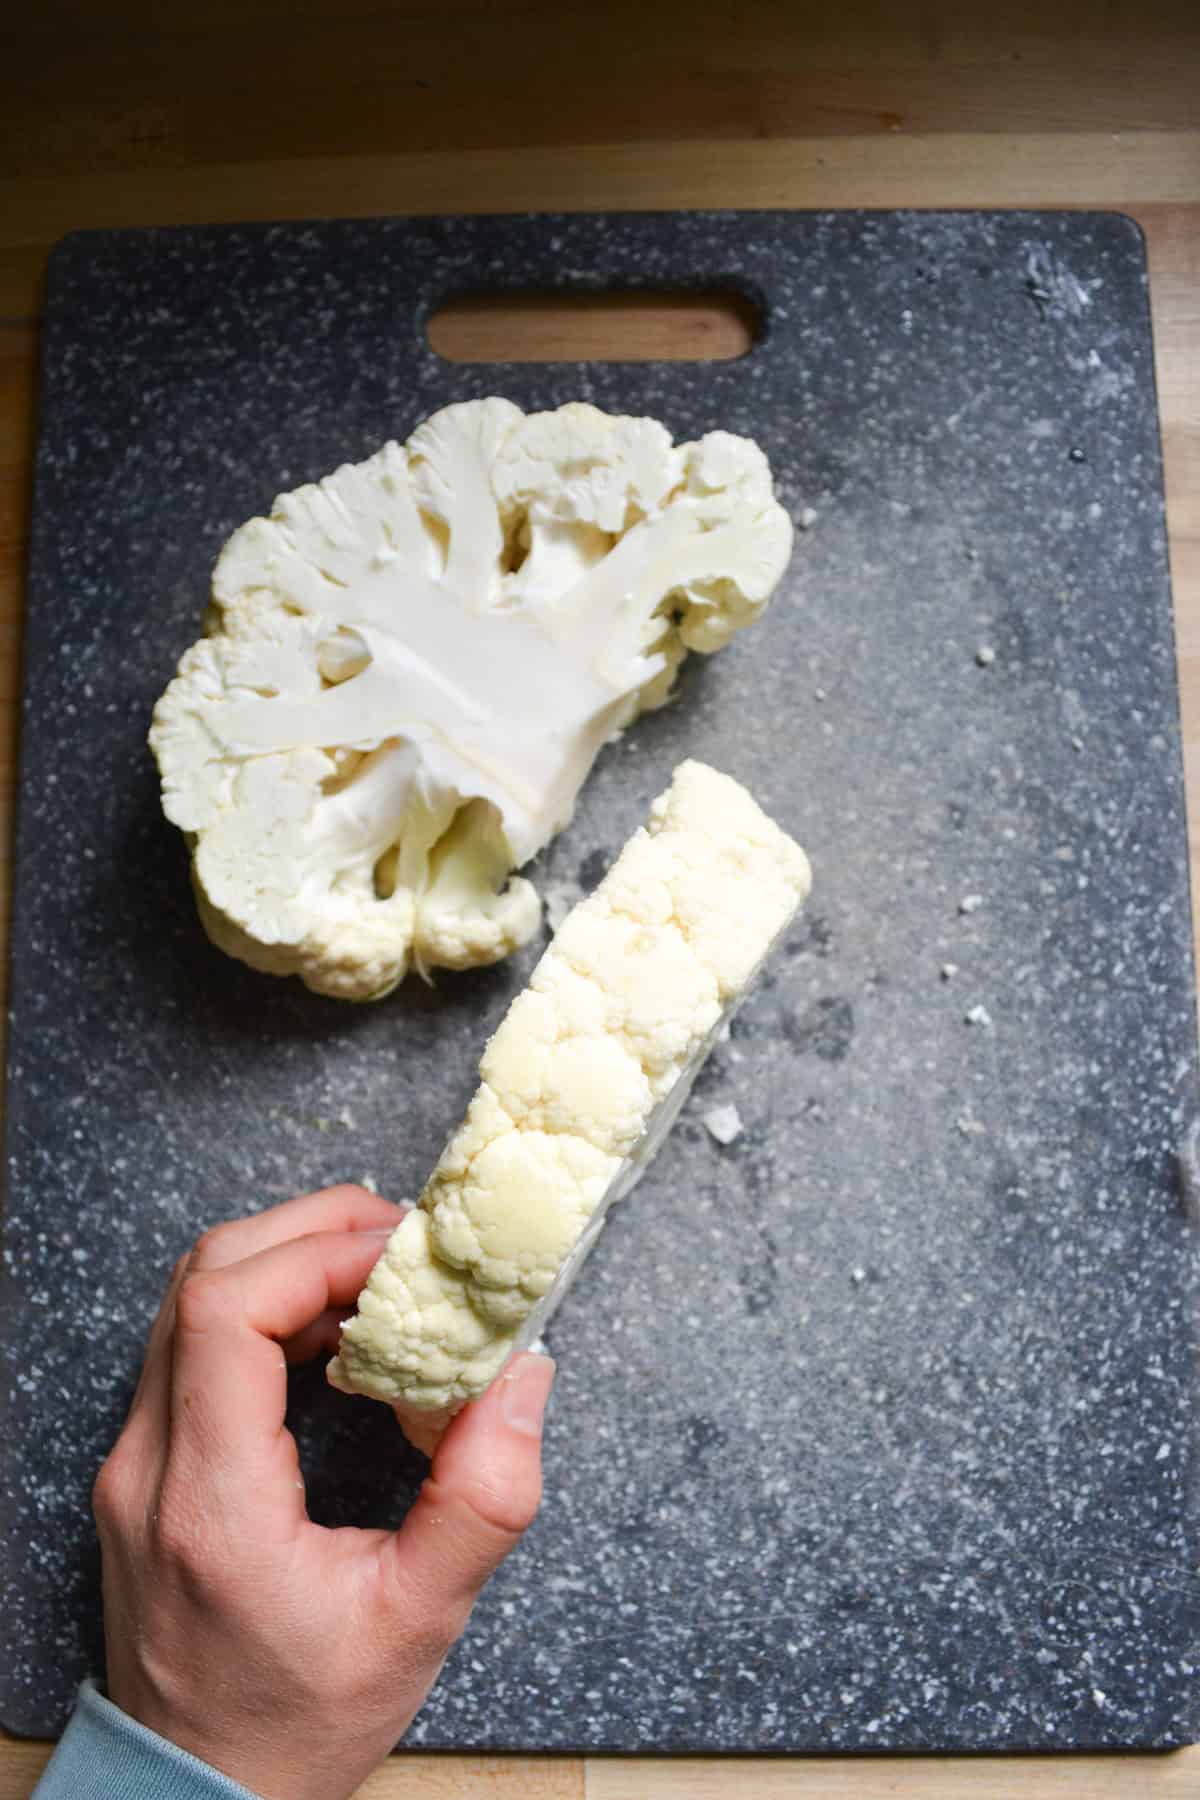 A hand holding a vegan cauliflower steak to show the thickness with another cauliflower steak in the background on a cutting board.